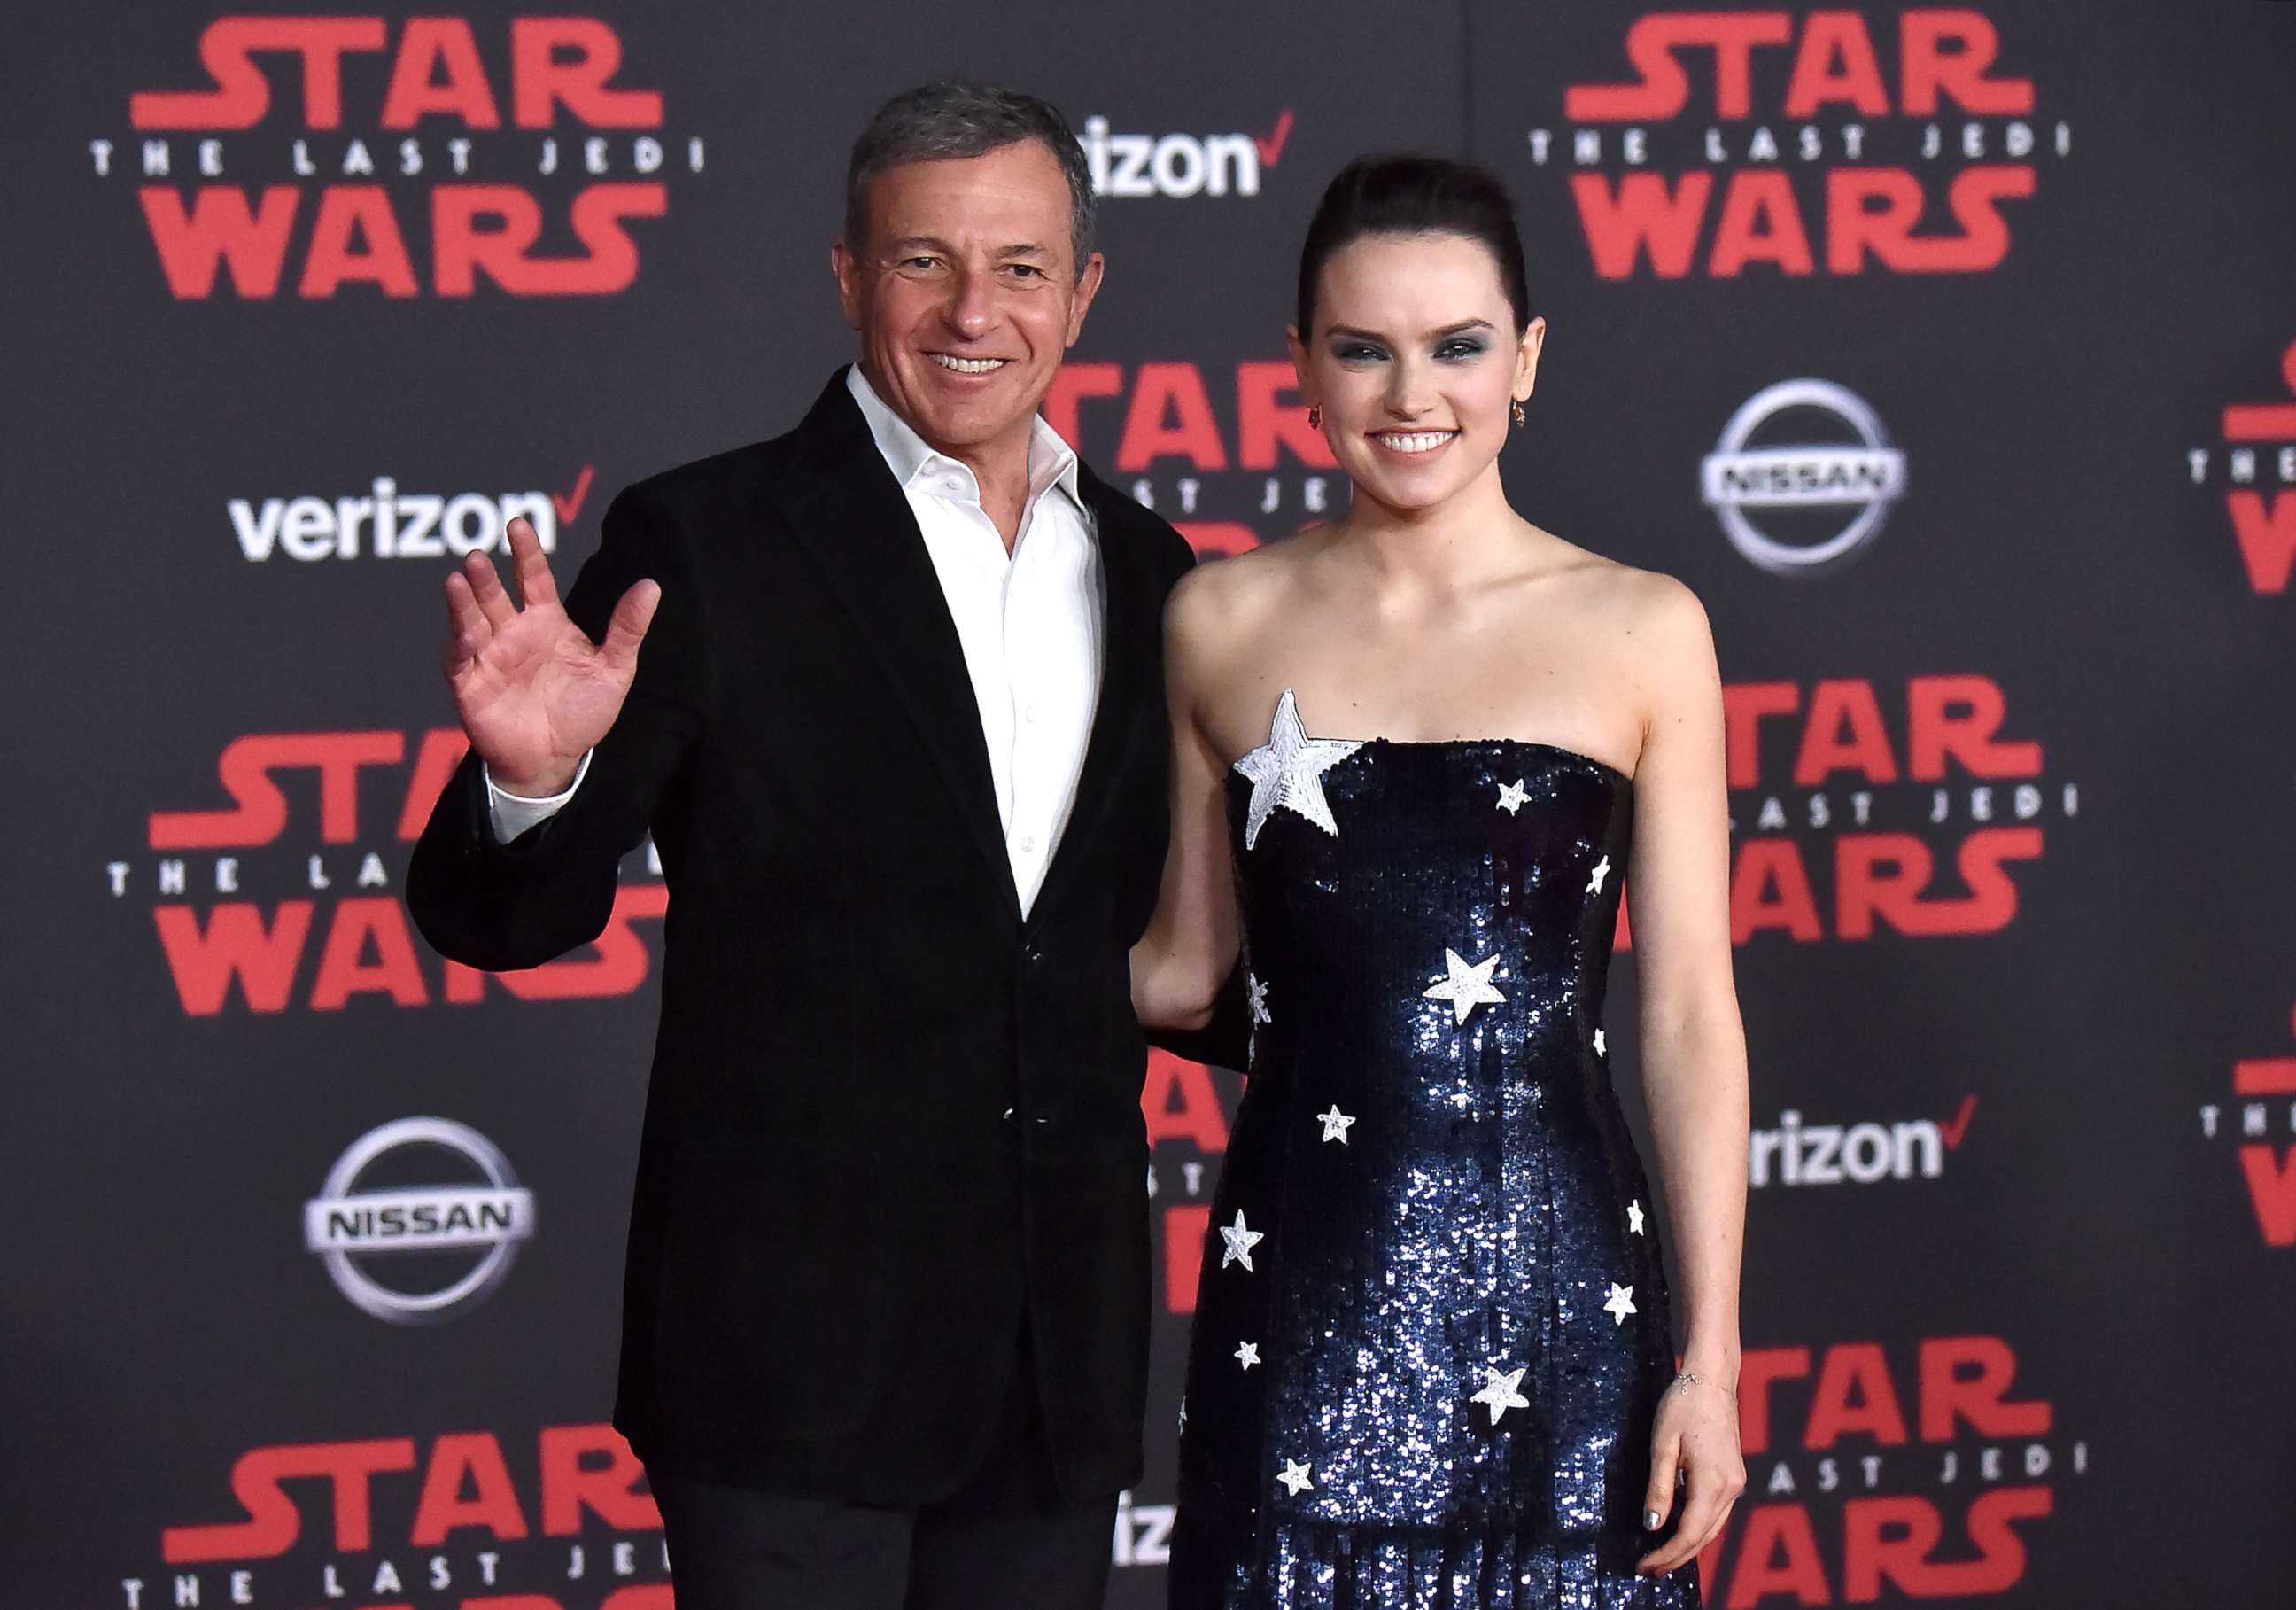 PHOTO: Walt Disney Company Chairman/CEO Robert Iger (L) and Daisy Ridley attend the premiere of Disney Pictures and Lucasfilm's "Star Wars: The Last Jedi" at The Shrine Auditorium on December 9, 2017 in Los Angeles, California.  